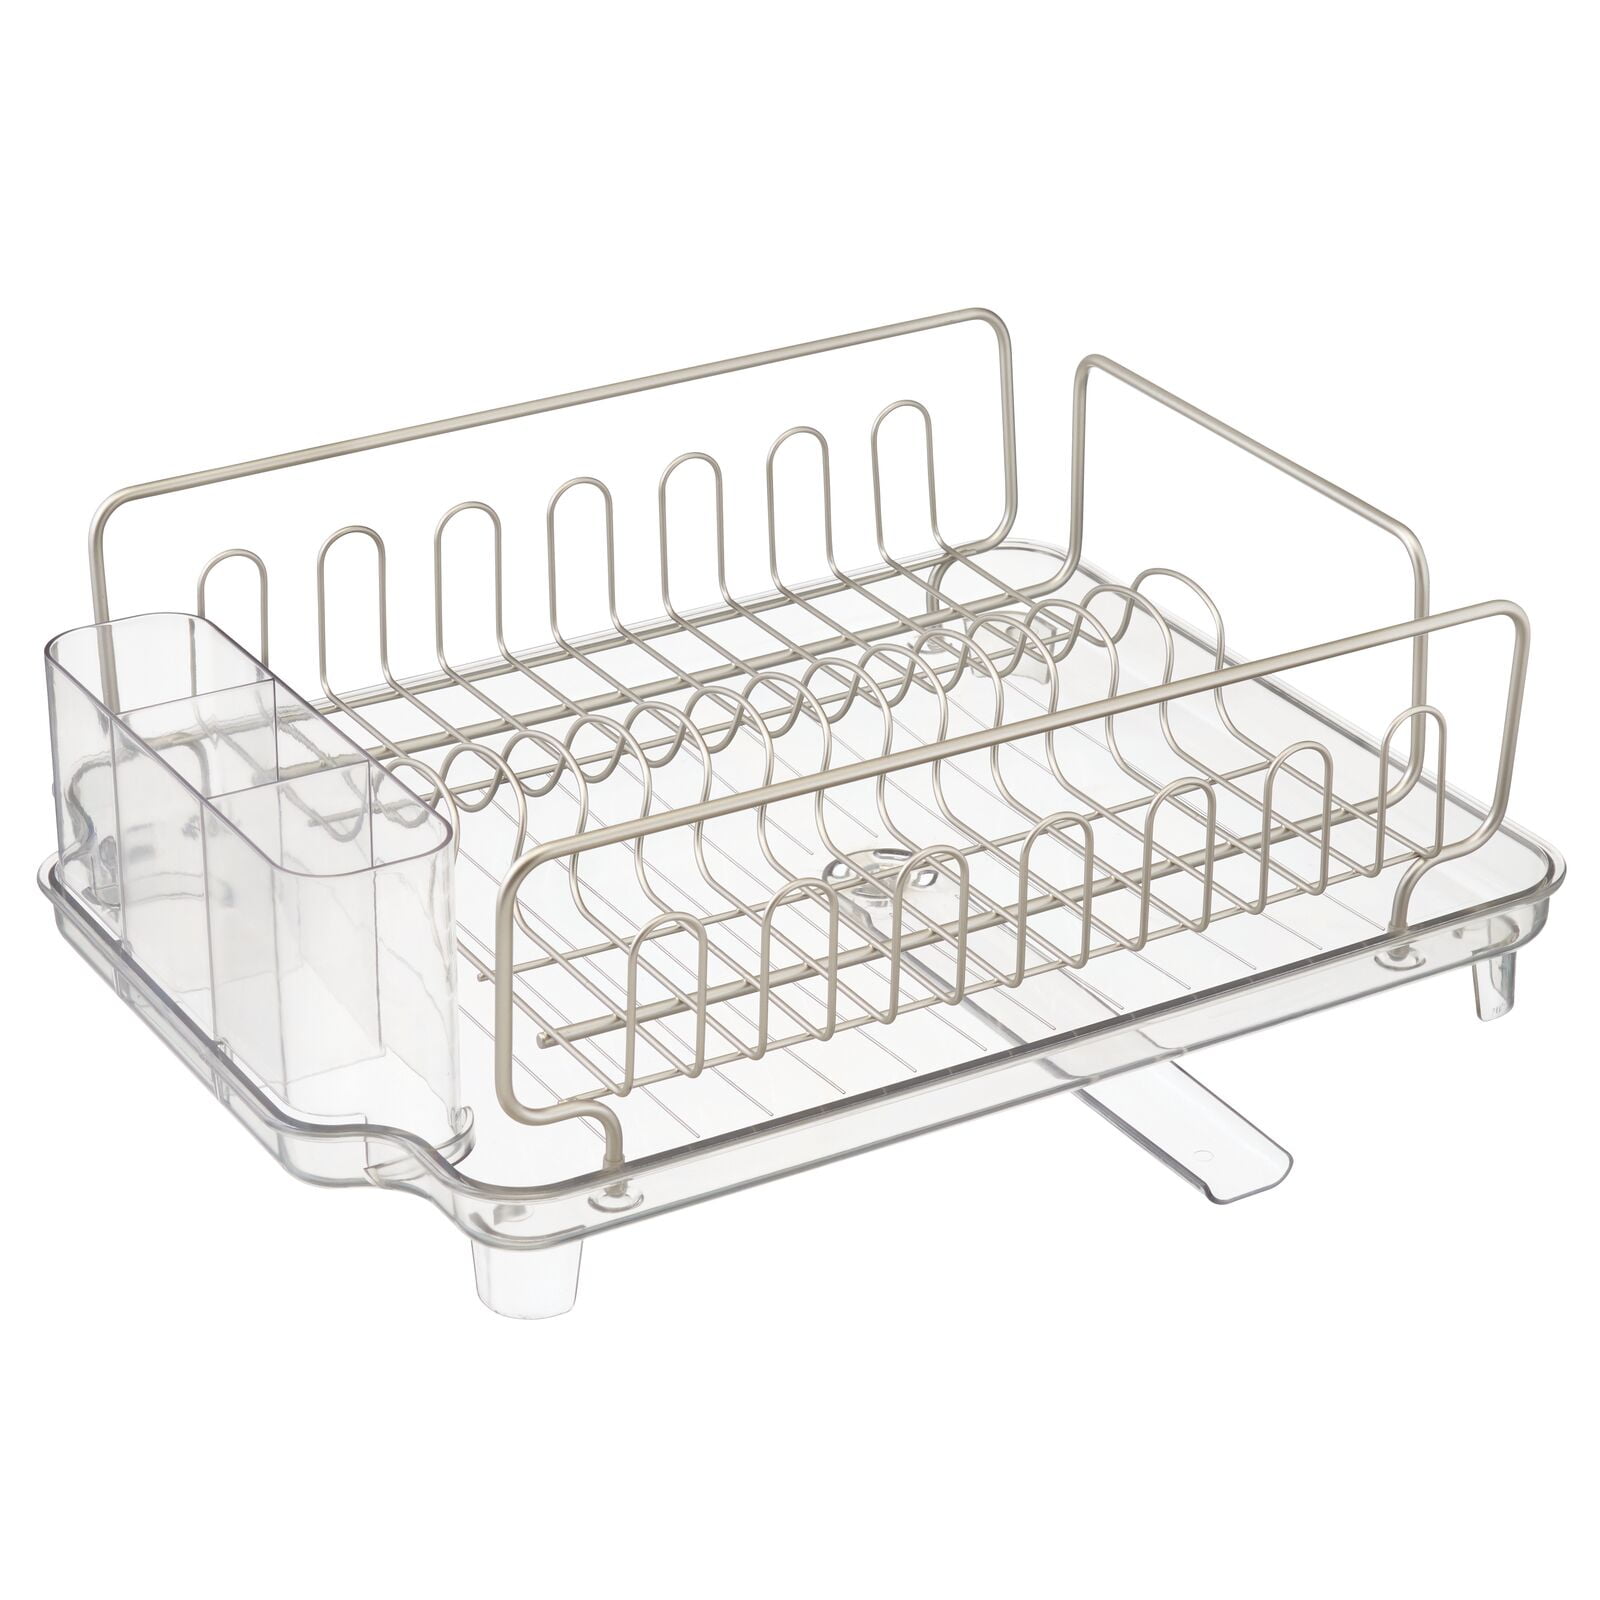 Anti-Rust Chrome Finish and a Non-Slip Base from Jean-Patrique Features an Expandable Two-Tier Design for Extra Capacity Folding Dish Drainer with Tray